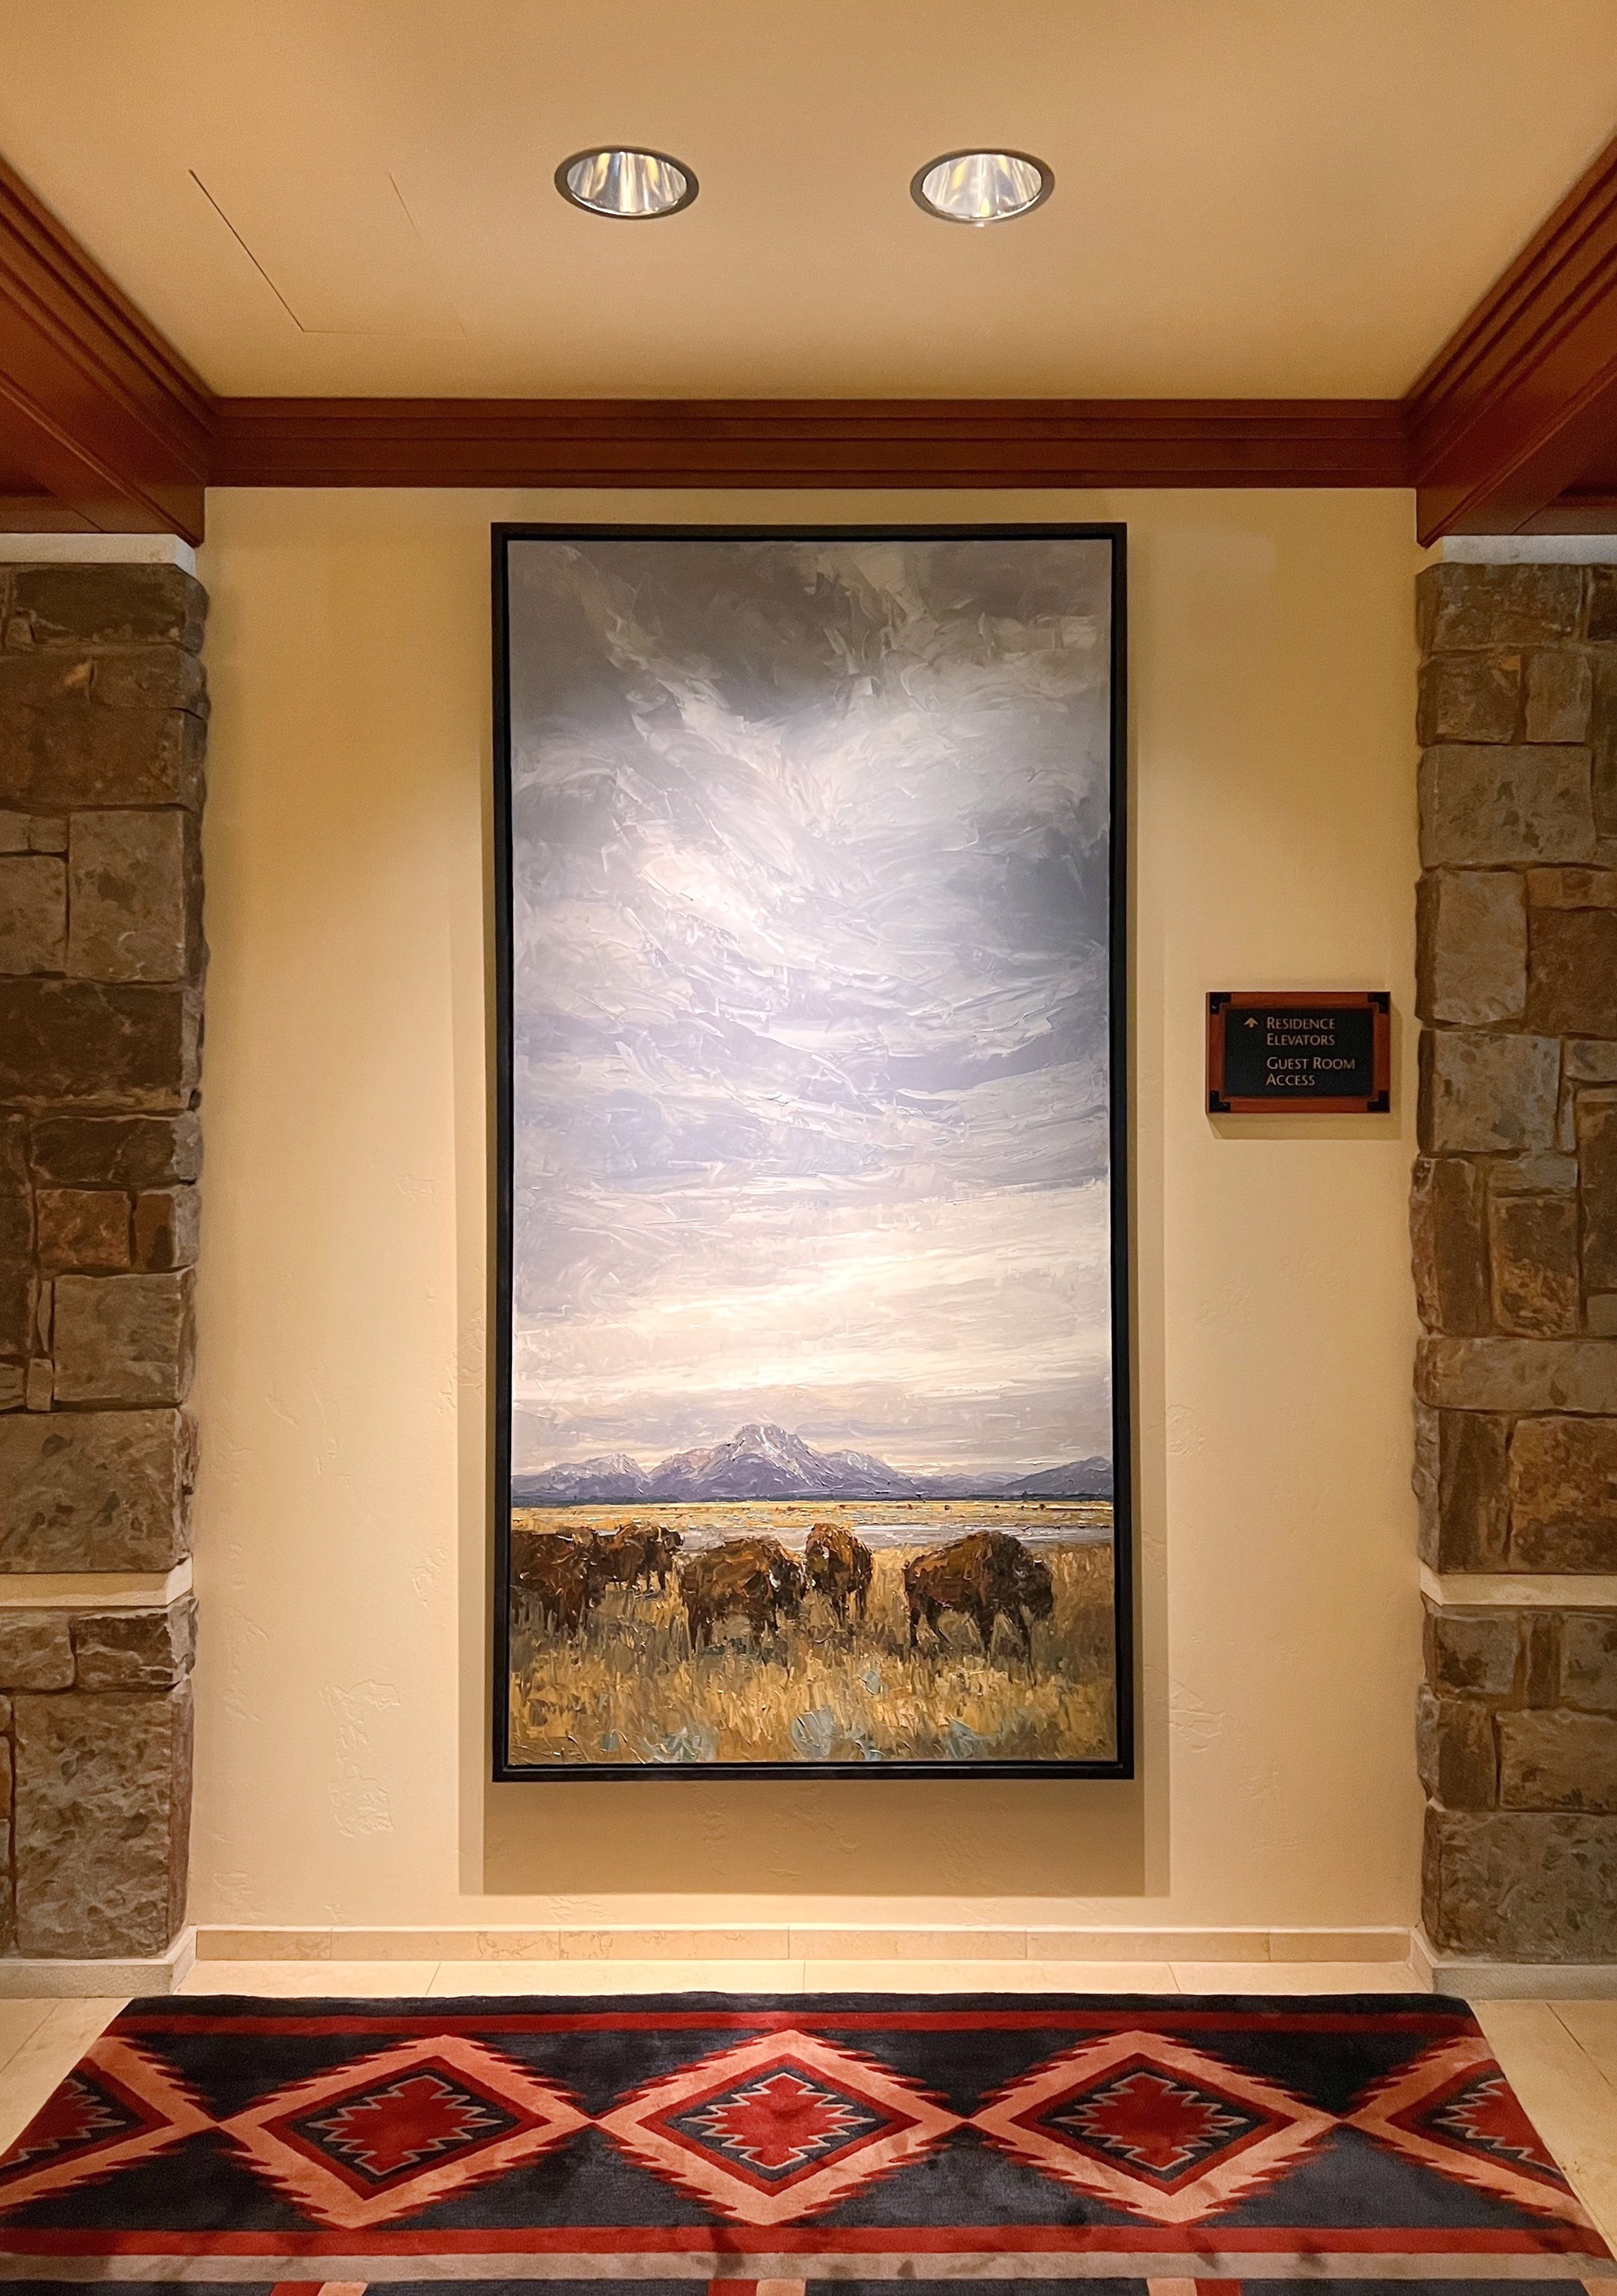 Original Oil Painting By Caleb Meyer Featuring Bison In Front Of Stormy Mountain Landscape With Thick Palette Knife Paint Application